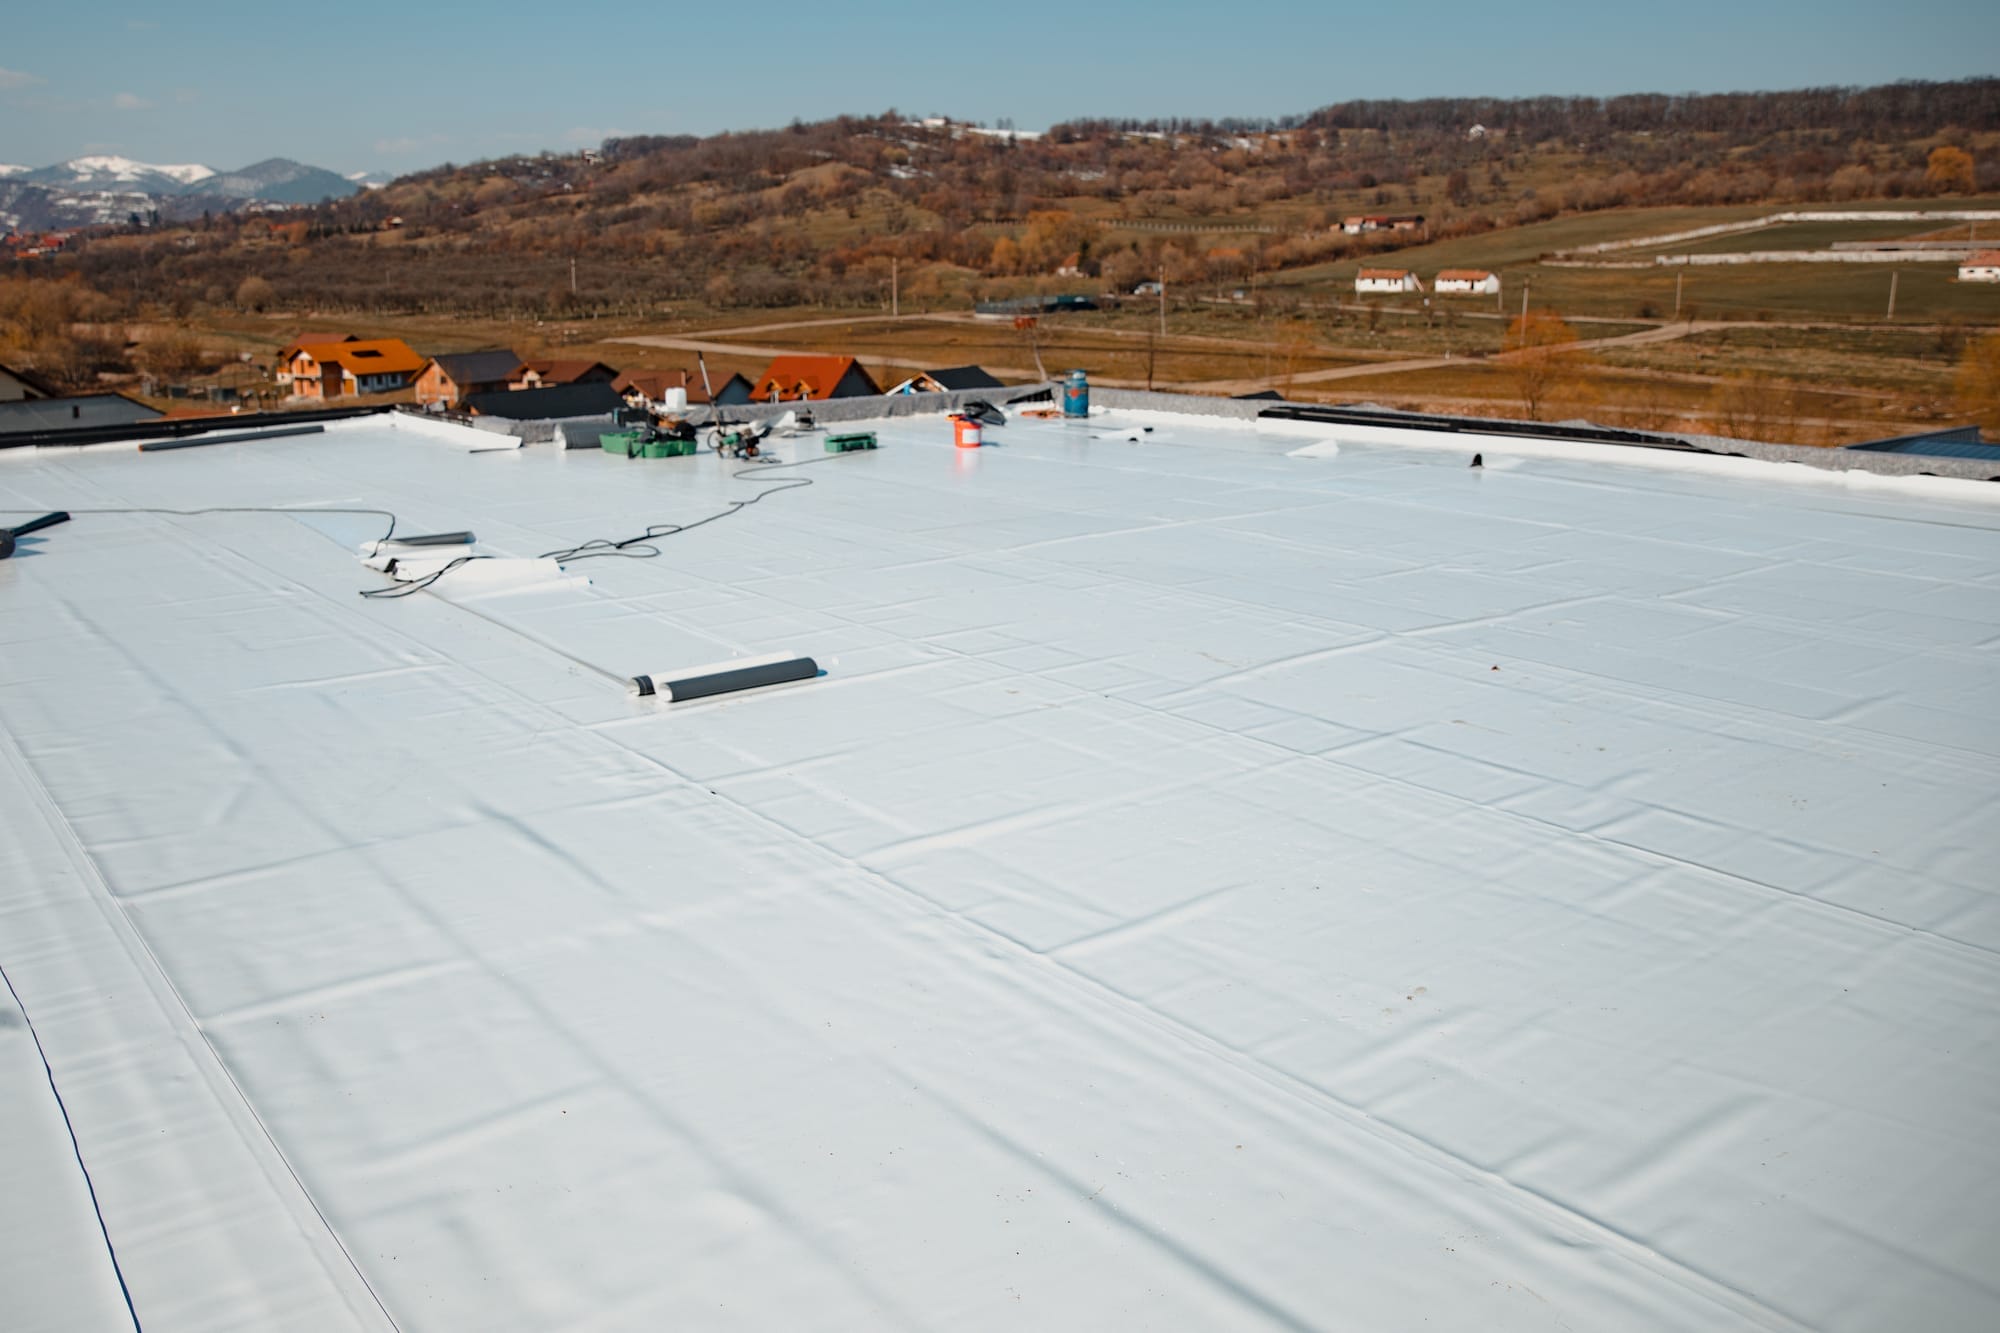 spring roof problems, commercial roof damage, spring weather damage